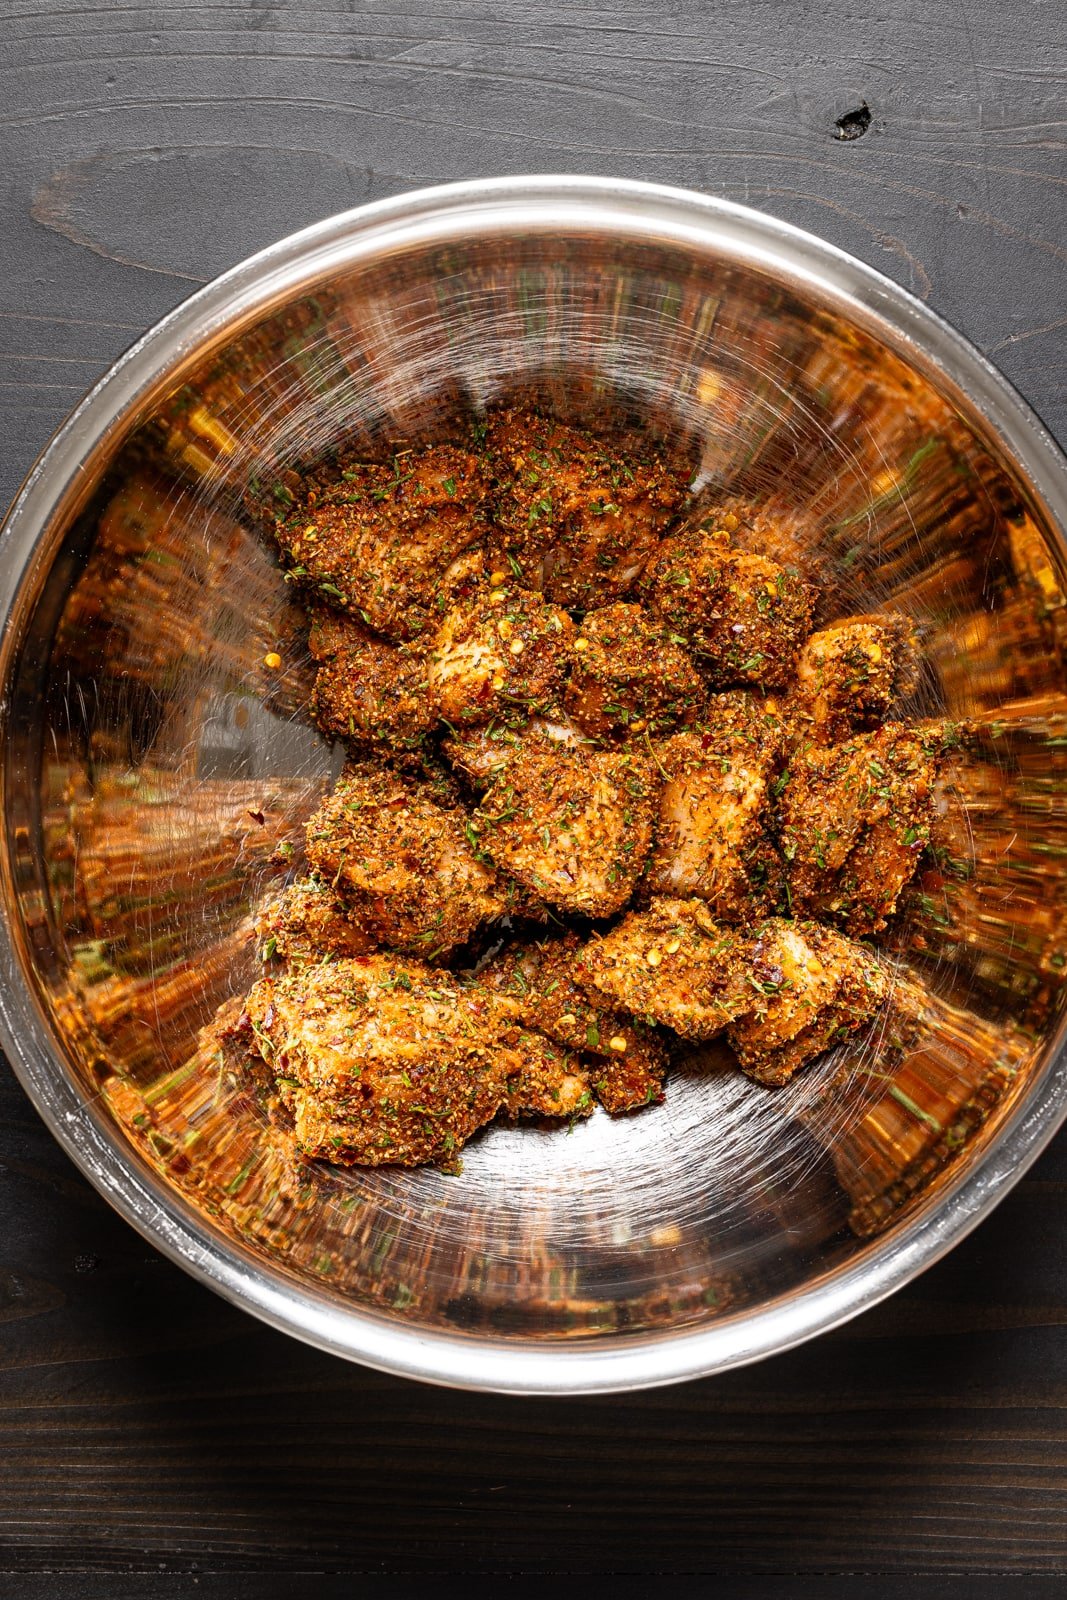 Seasoned chicken pieces in a large silver bowl.